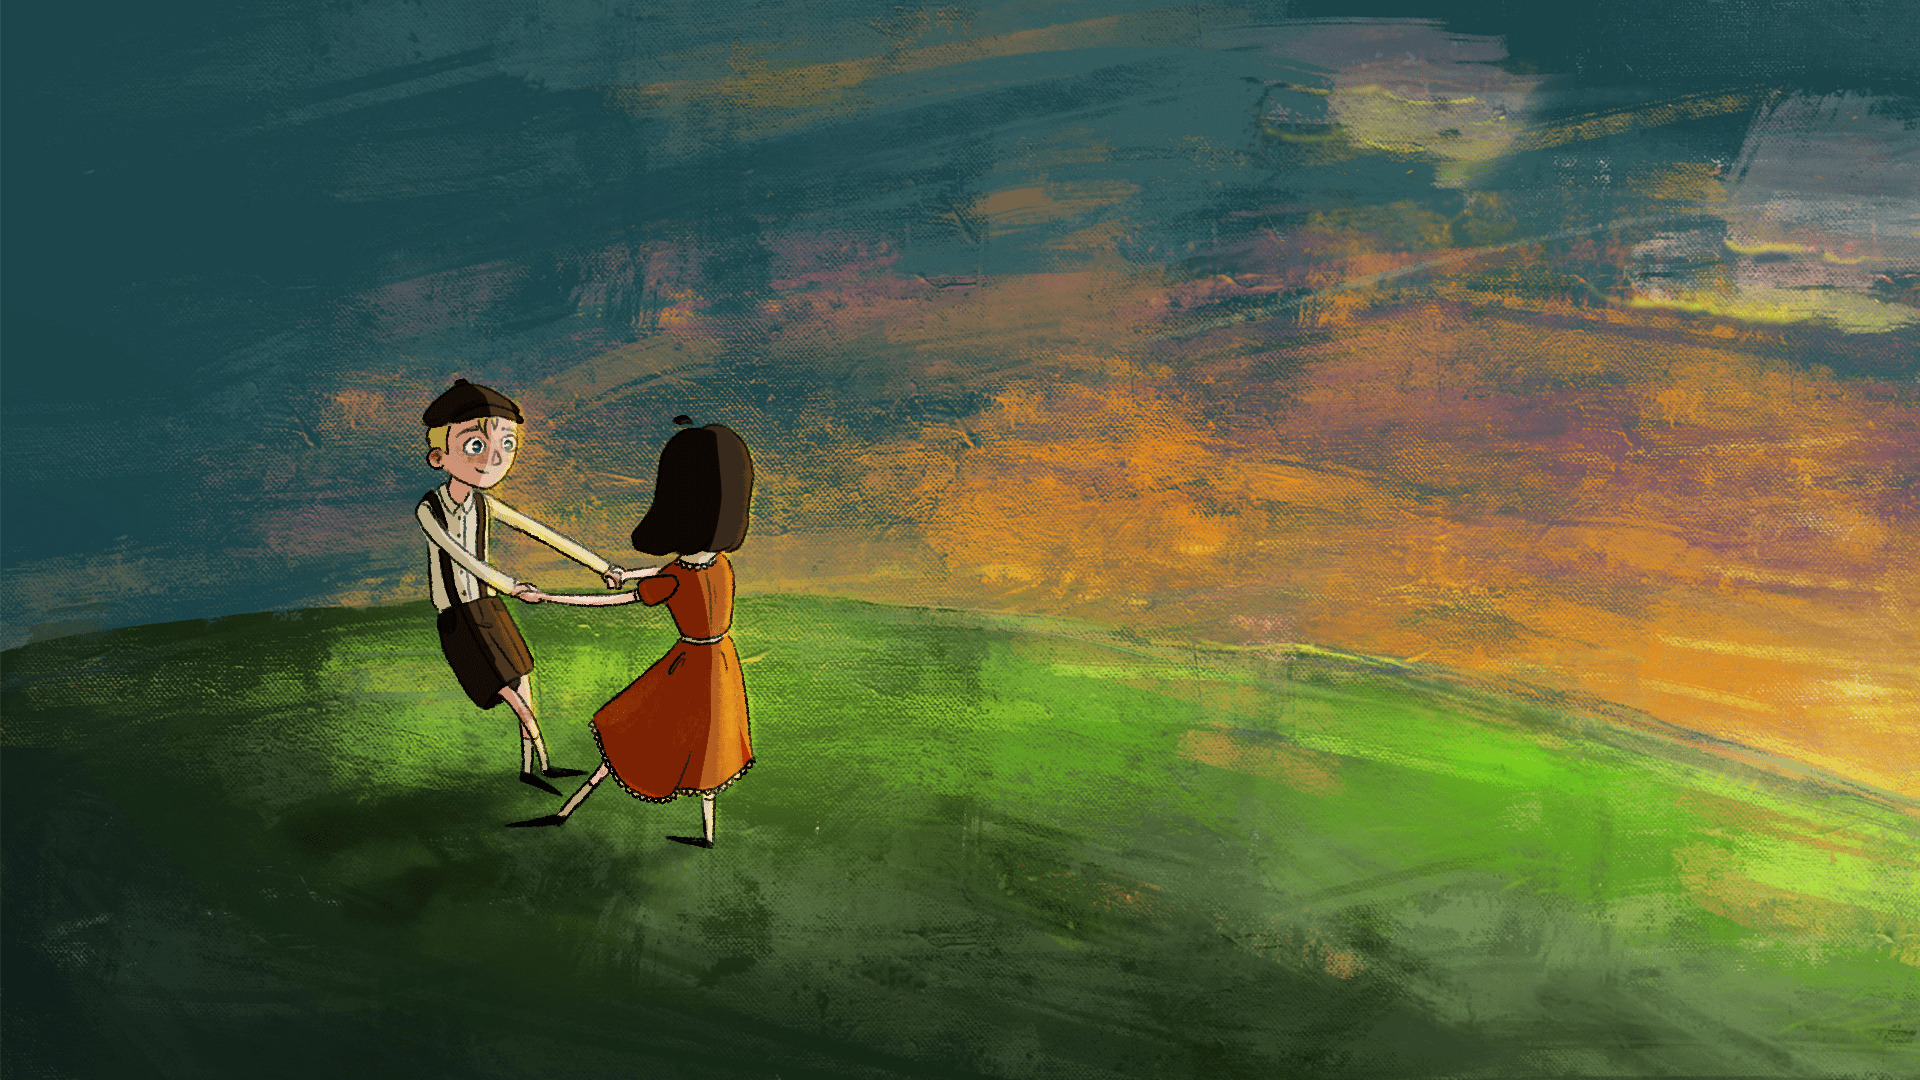 A childhood memory: a boy and a girl dance holding hands, happily spinning around in a field.